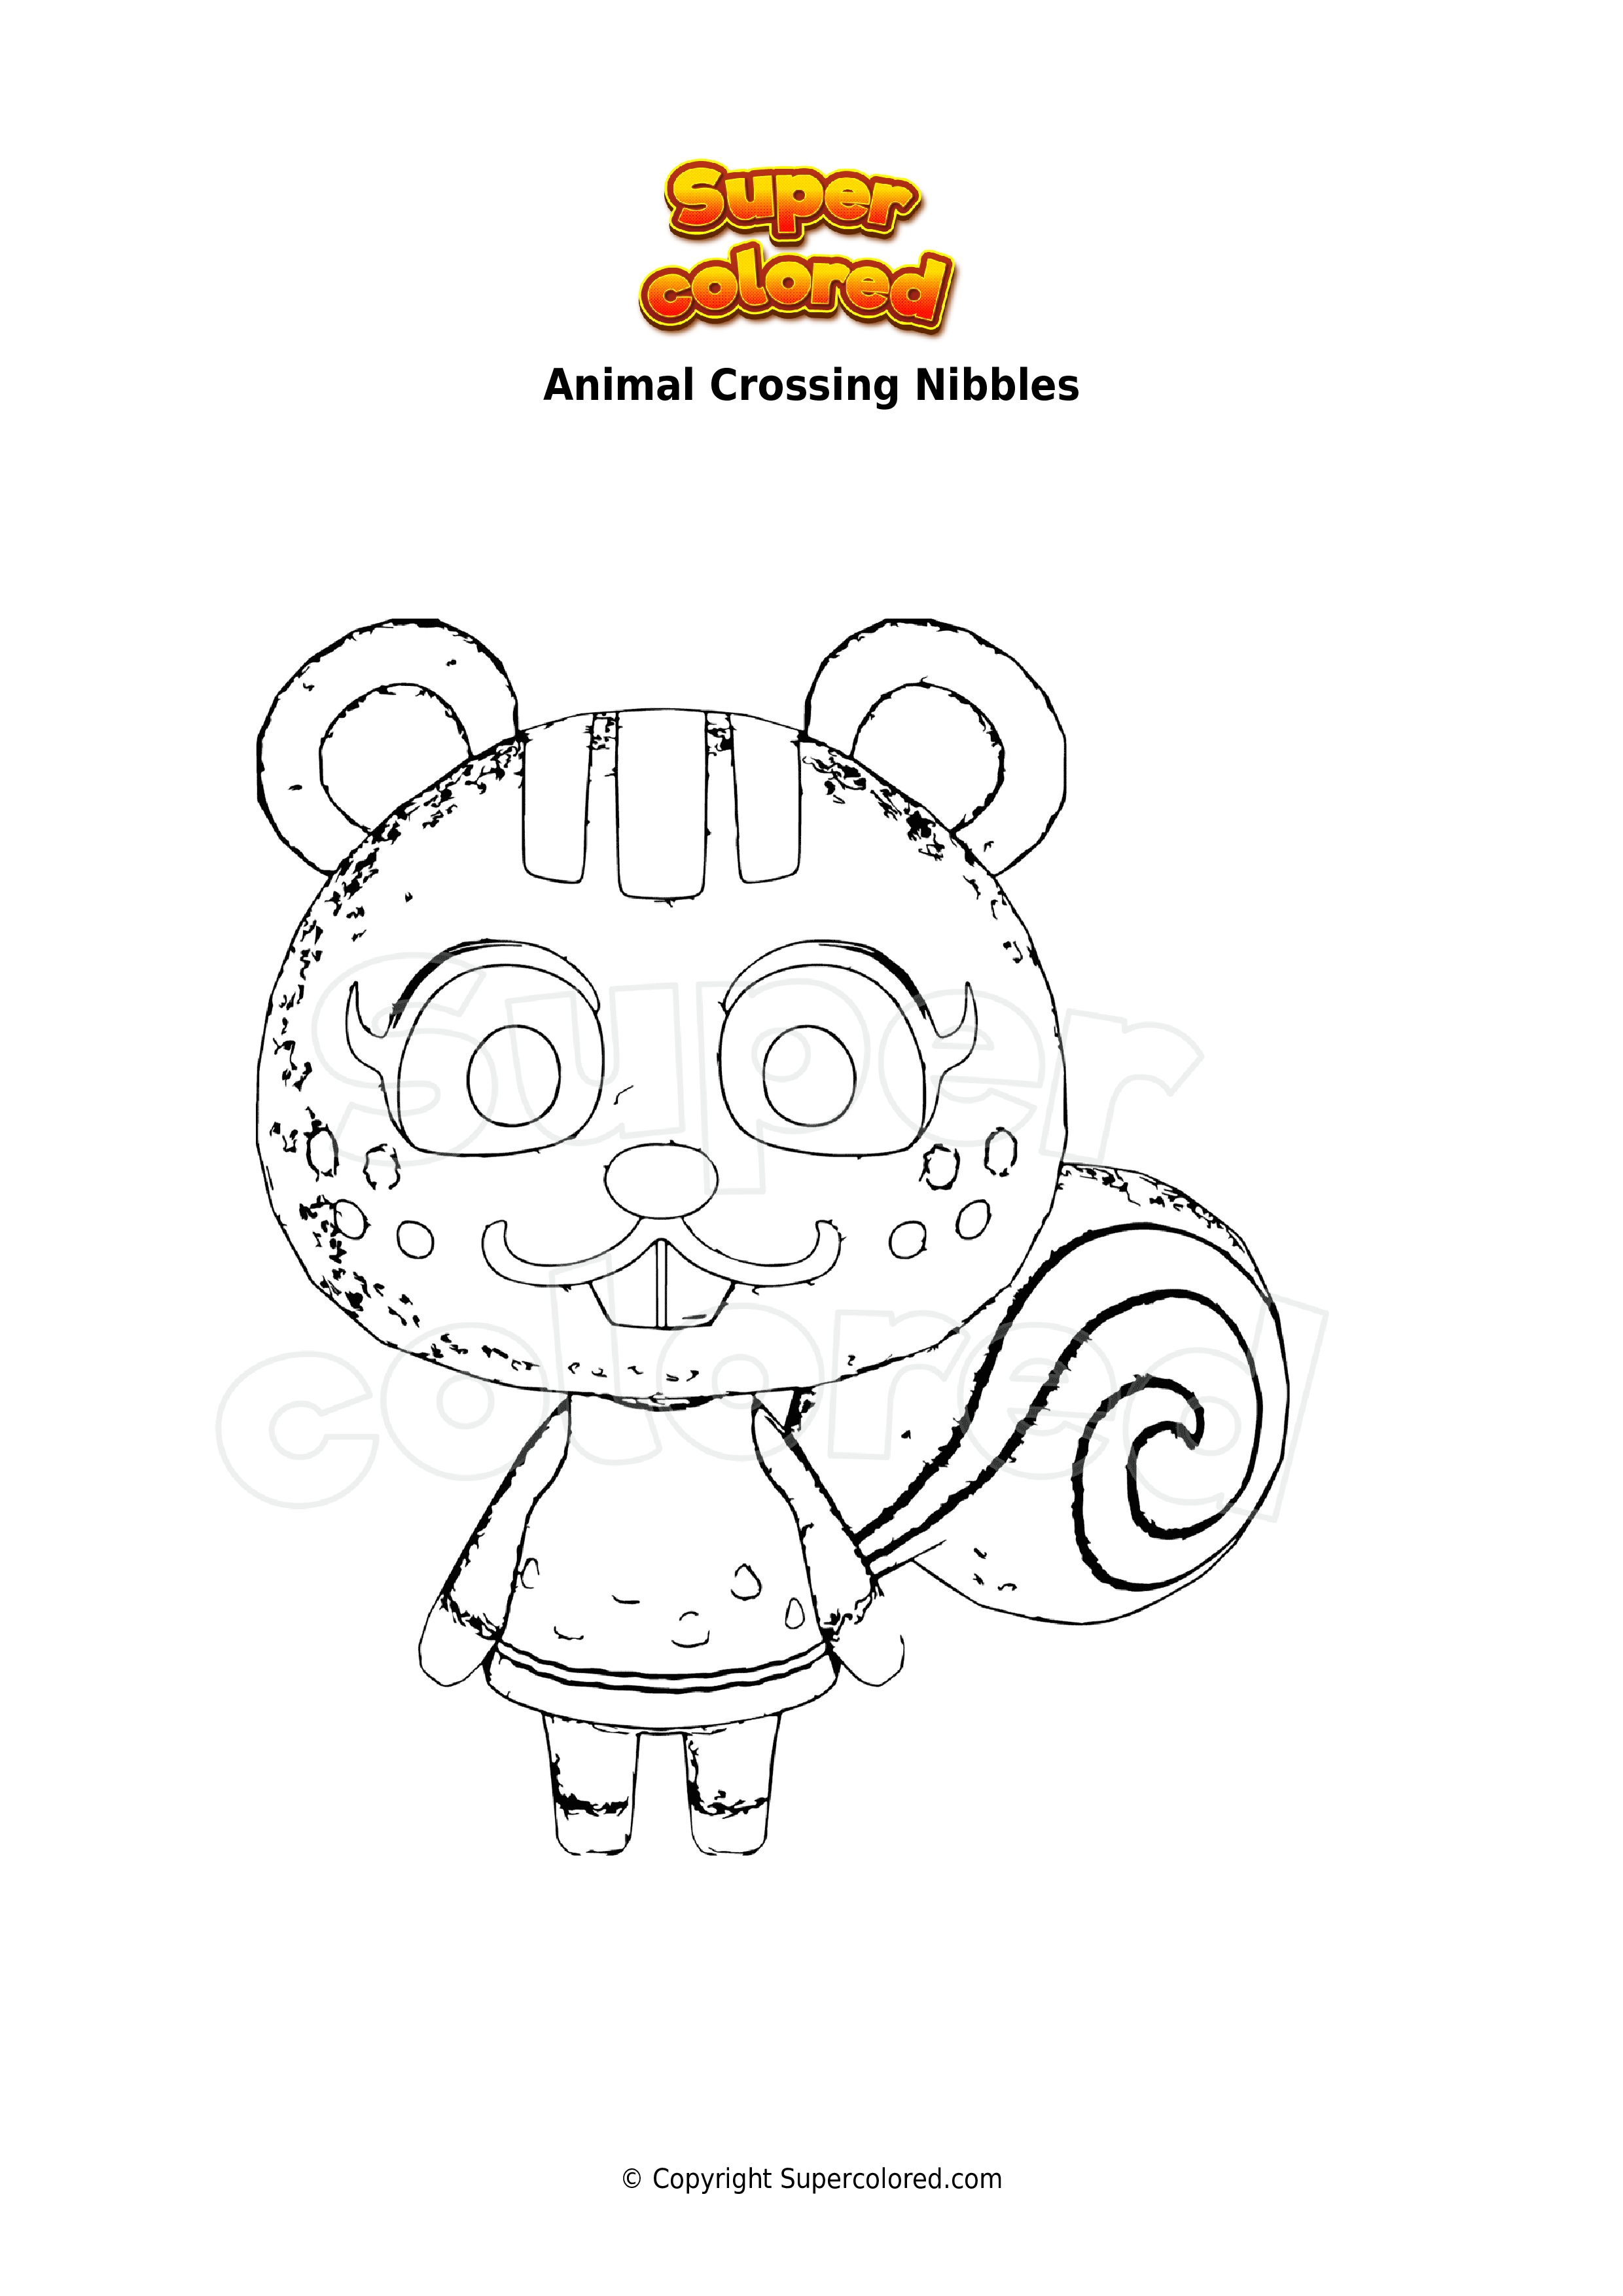 Coloring page Animal Crossing Nibbles   Supercolored.com